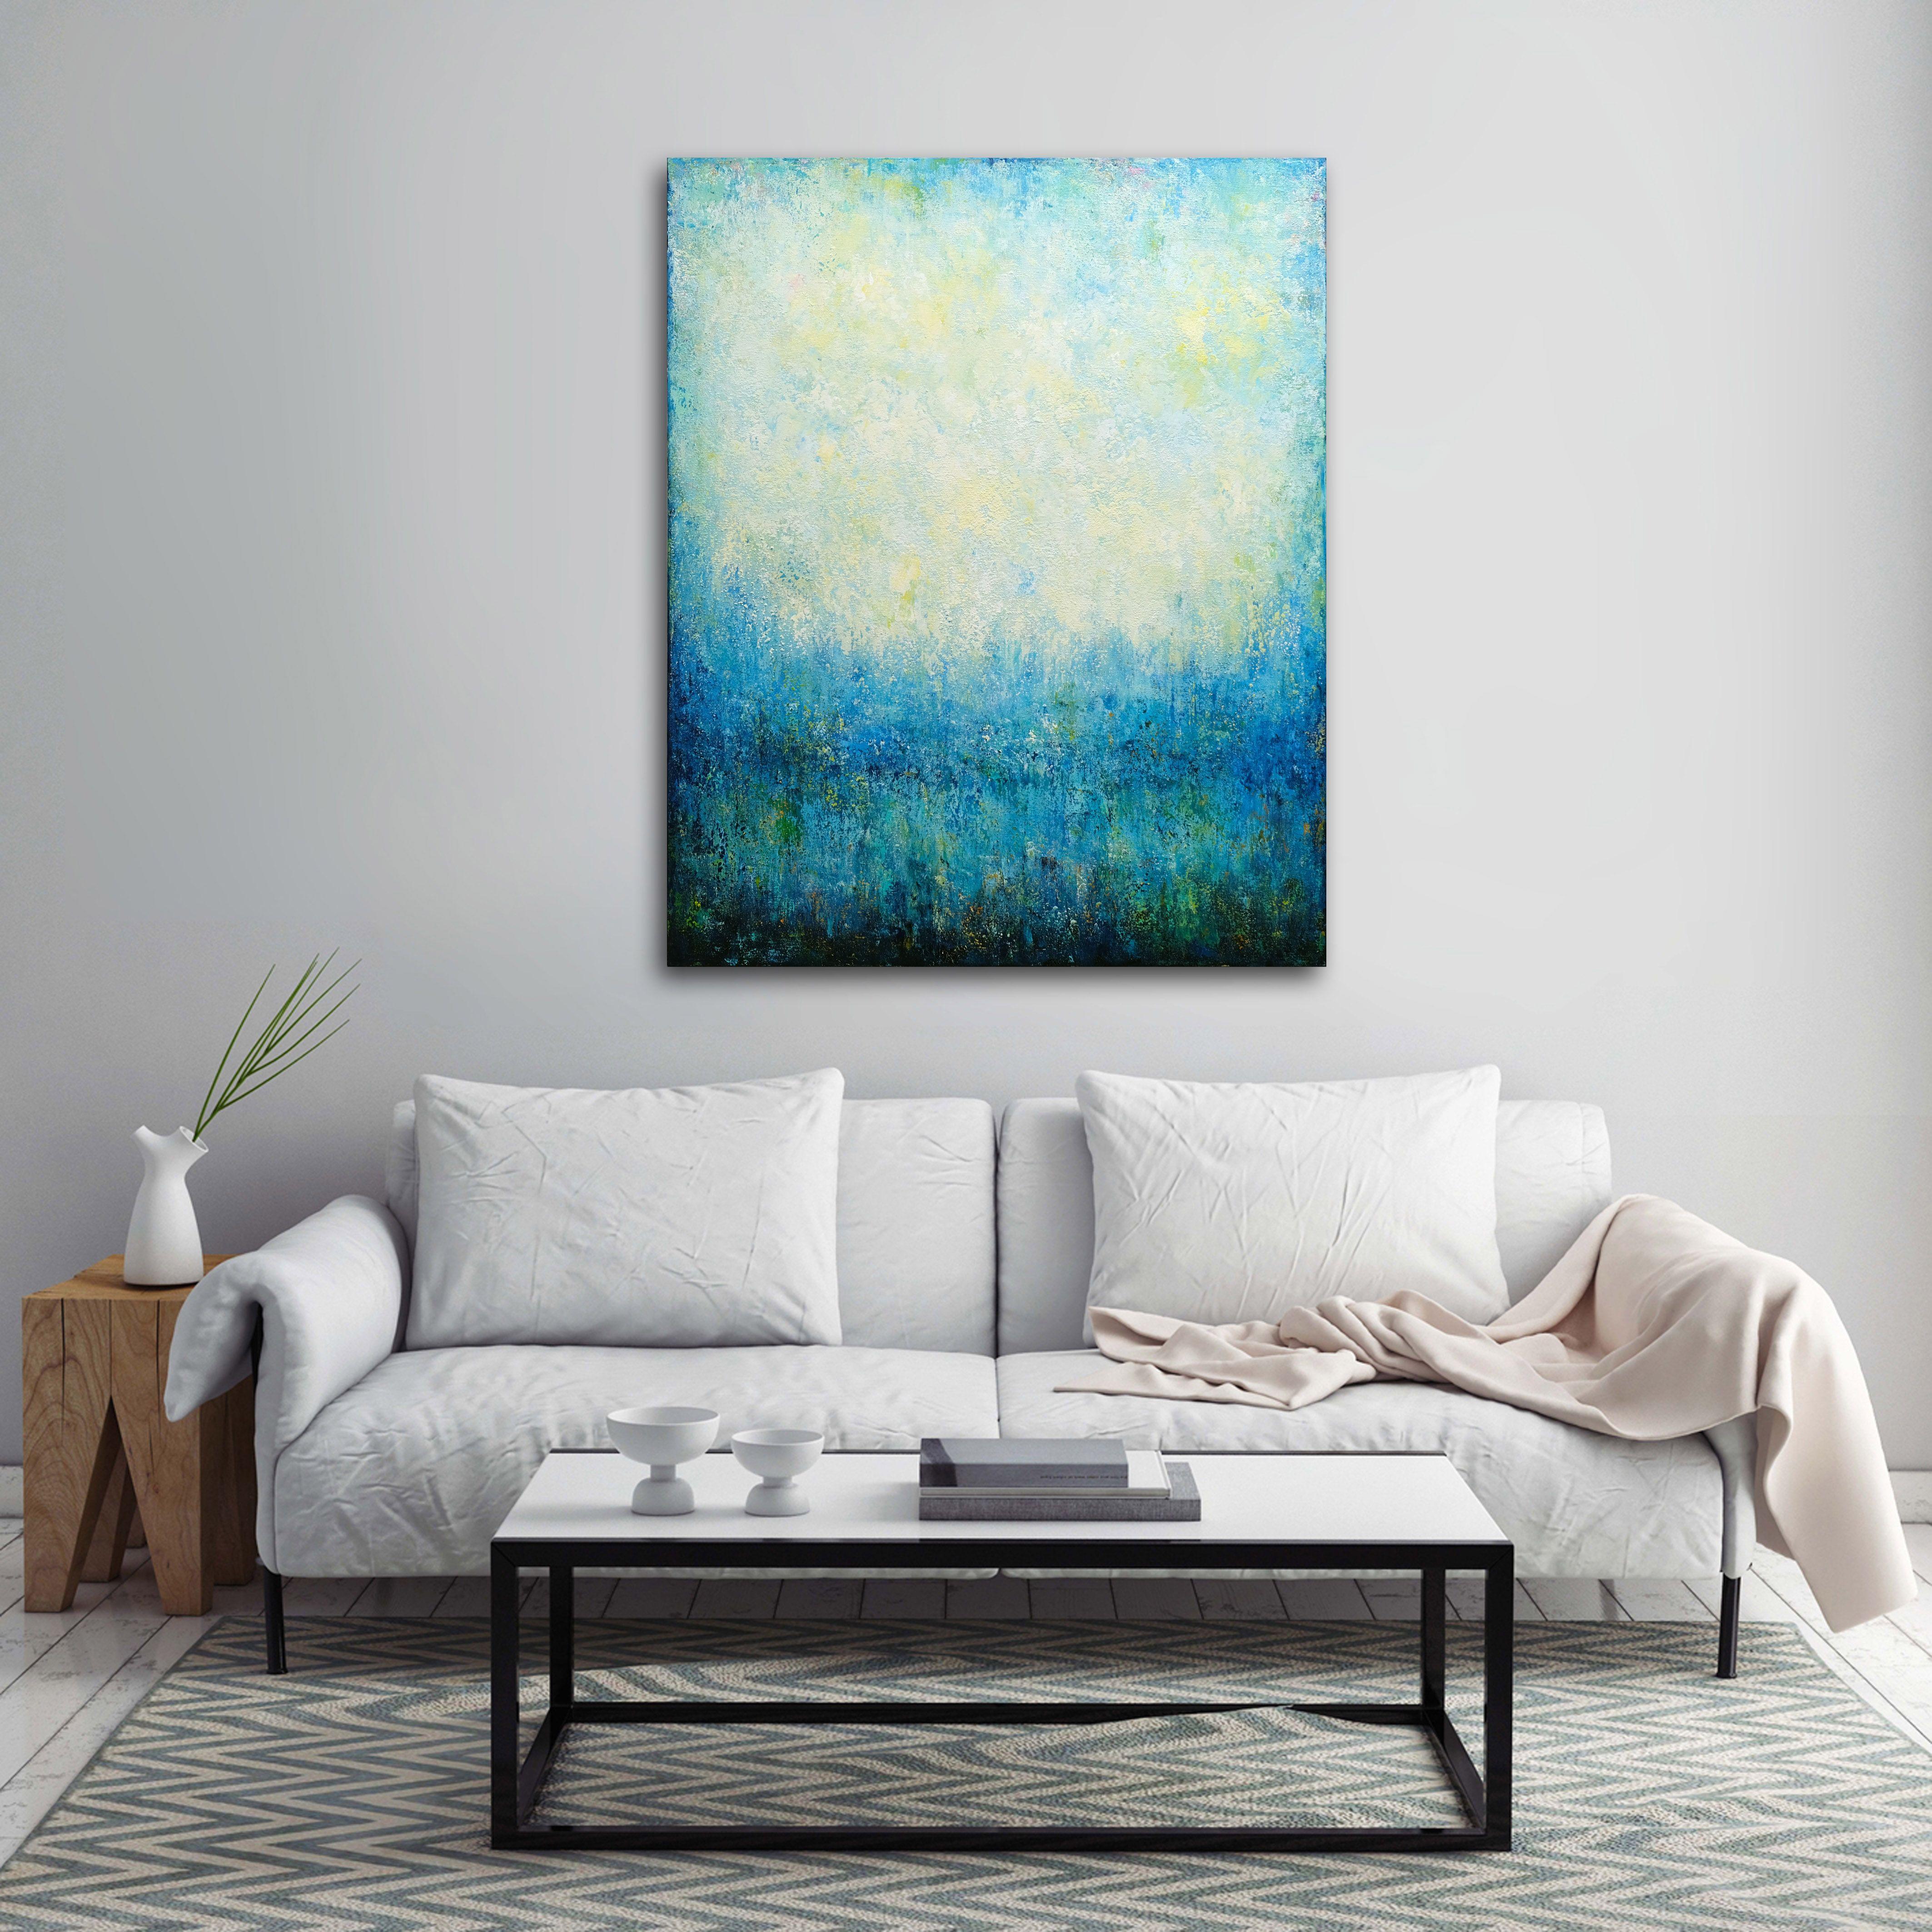 Dimensions: 81x100 cm - 31,89x39,37 inches.  Original abstract painting with turquoise colors that makes you feel relaxed and peaceful.  It was painted in multiple layers with palette knife and brushes.    * The artwork is signed on the back and